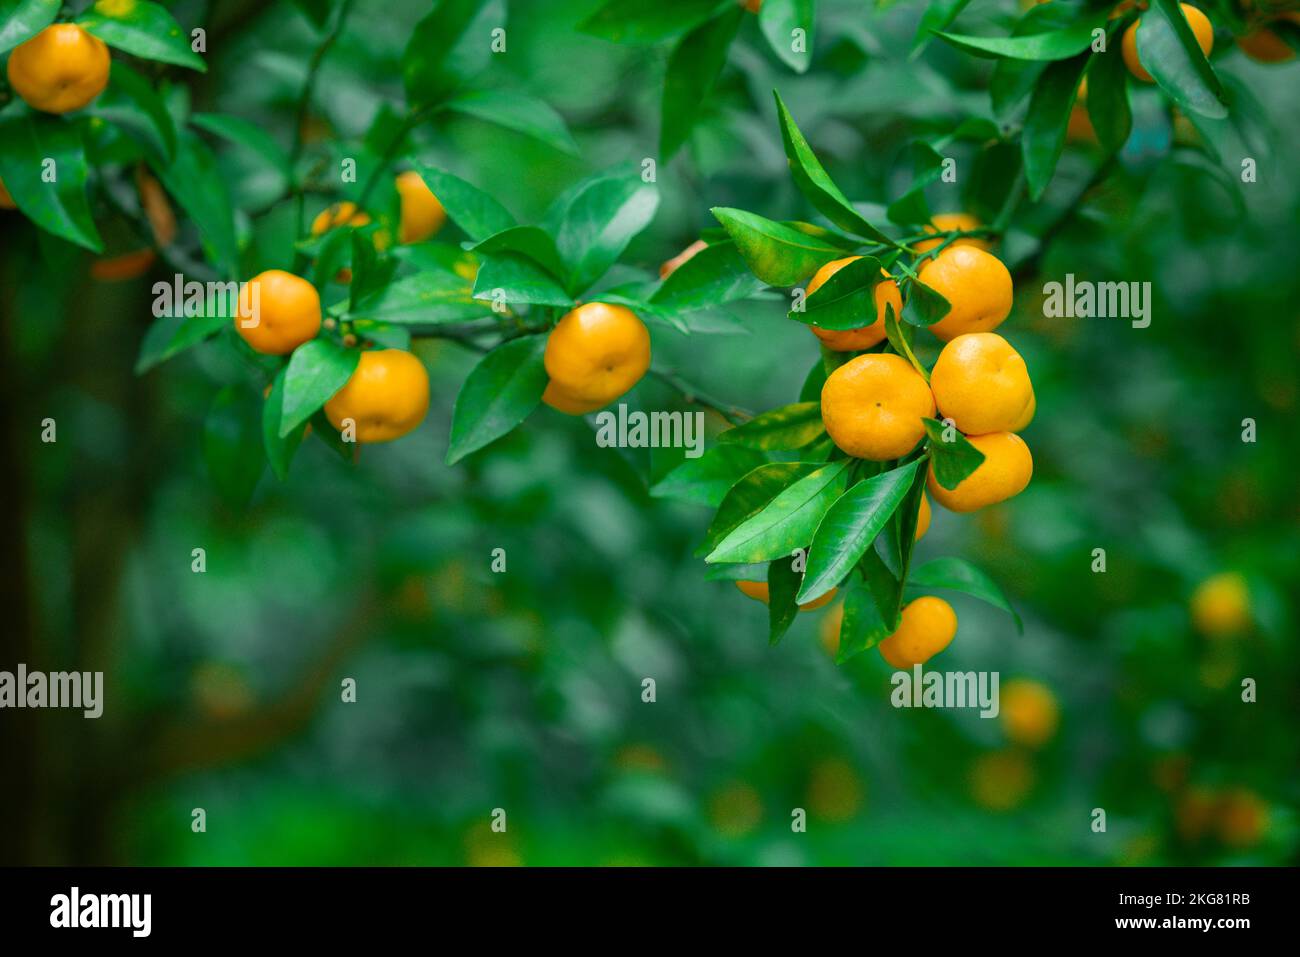 Mandarins ripened on the green tree branch in orchard Stock Photo